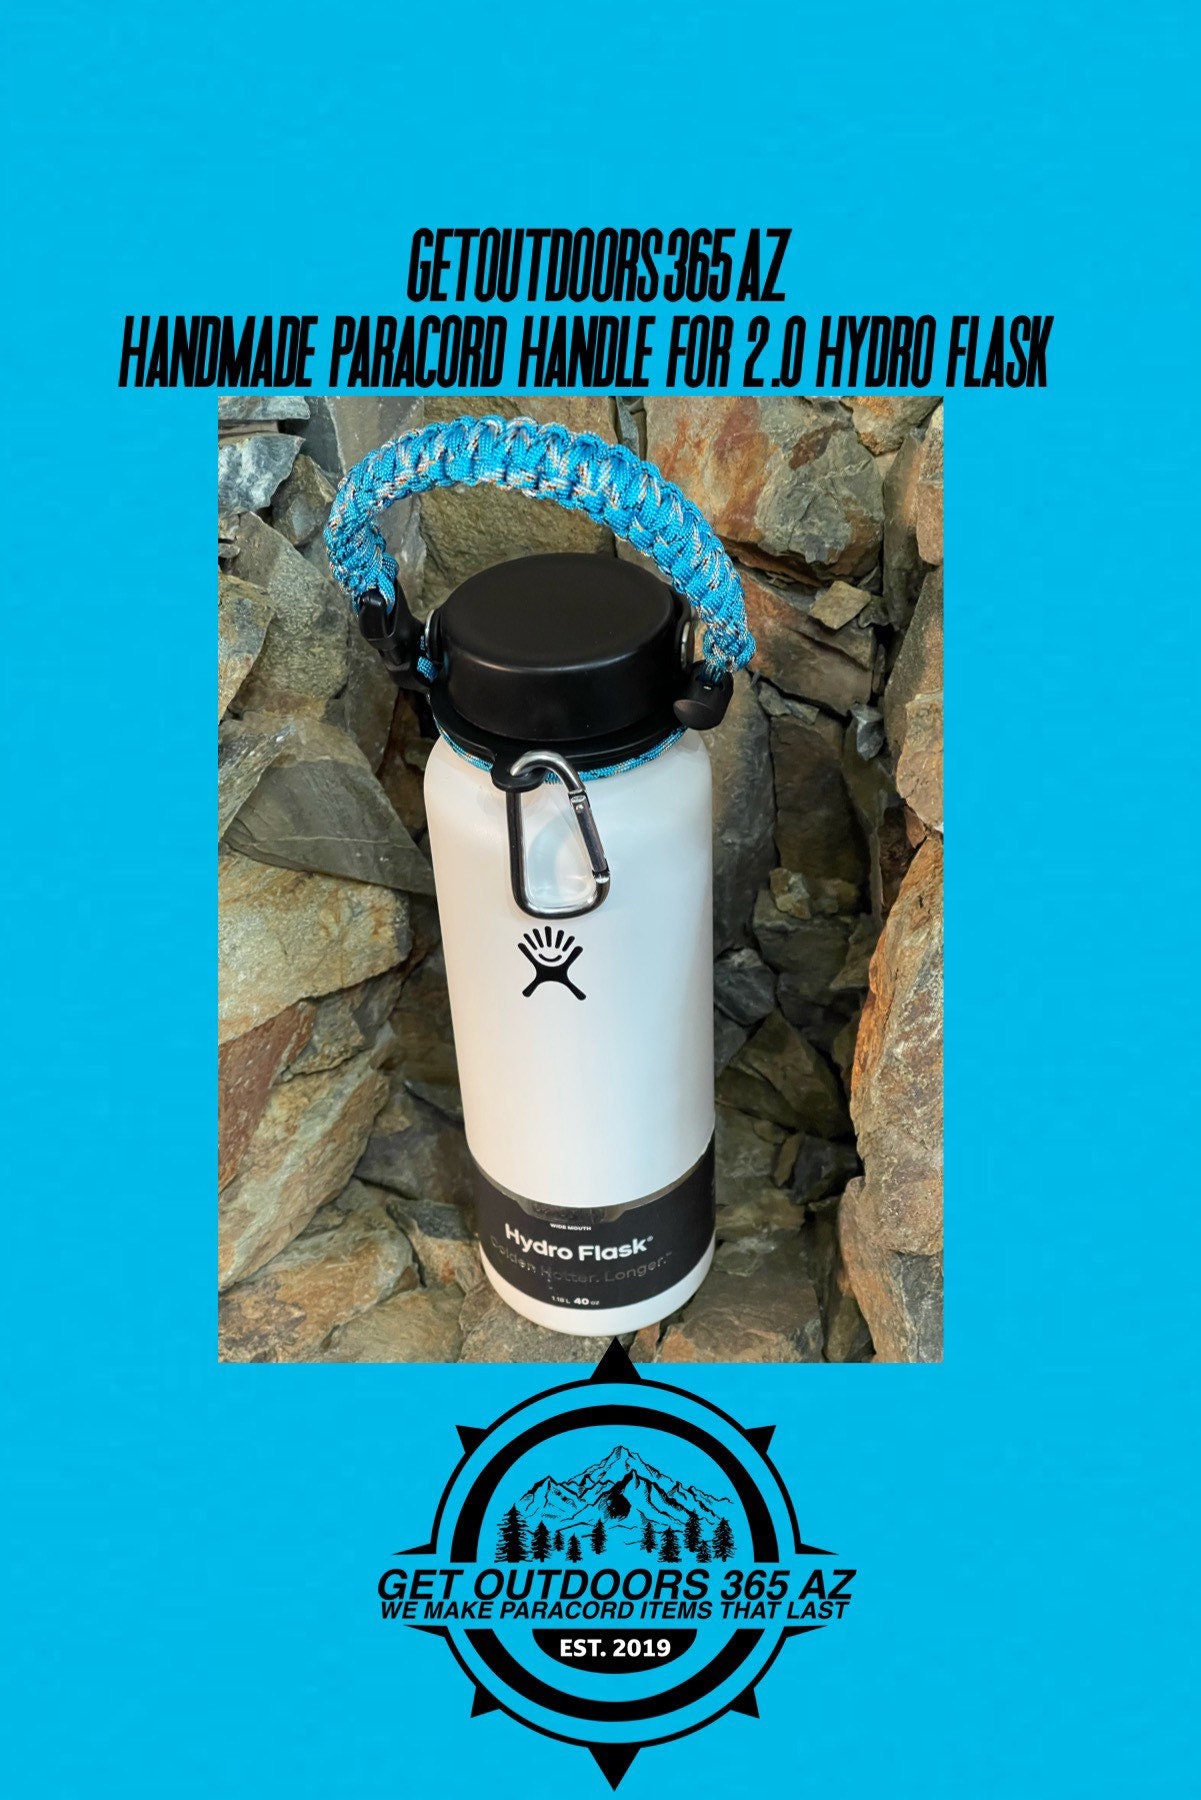  Miracredo Paracord Handle for New Hydro Flask 2.0 Wide Mouth  Water Bottle with Rubber Ring & Carabiner, Easy Carry Strap Holder for Hydro  Flask Water Bottle, Fit 12 oz to